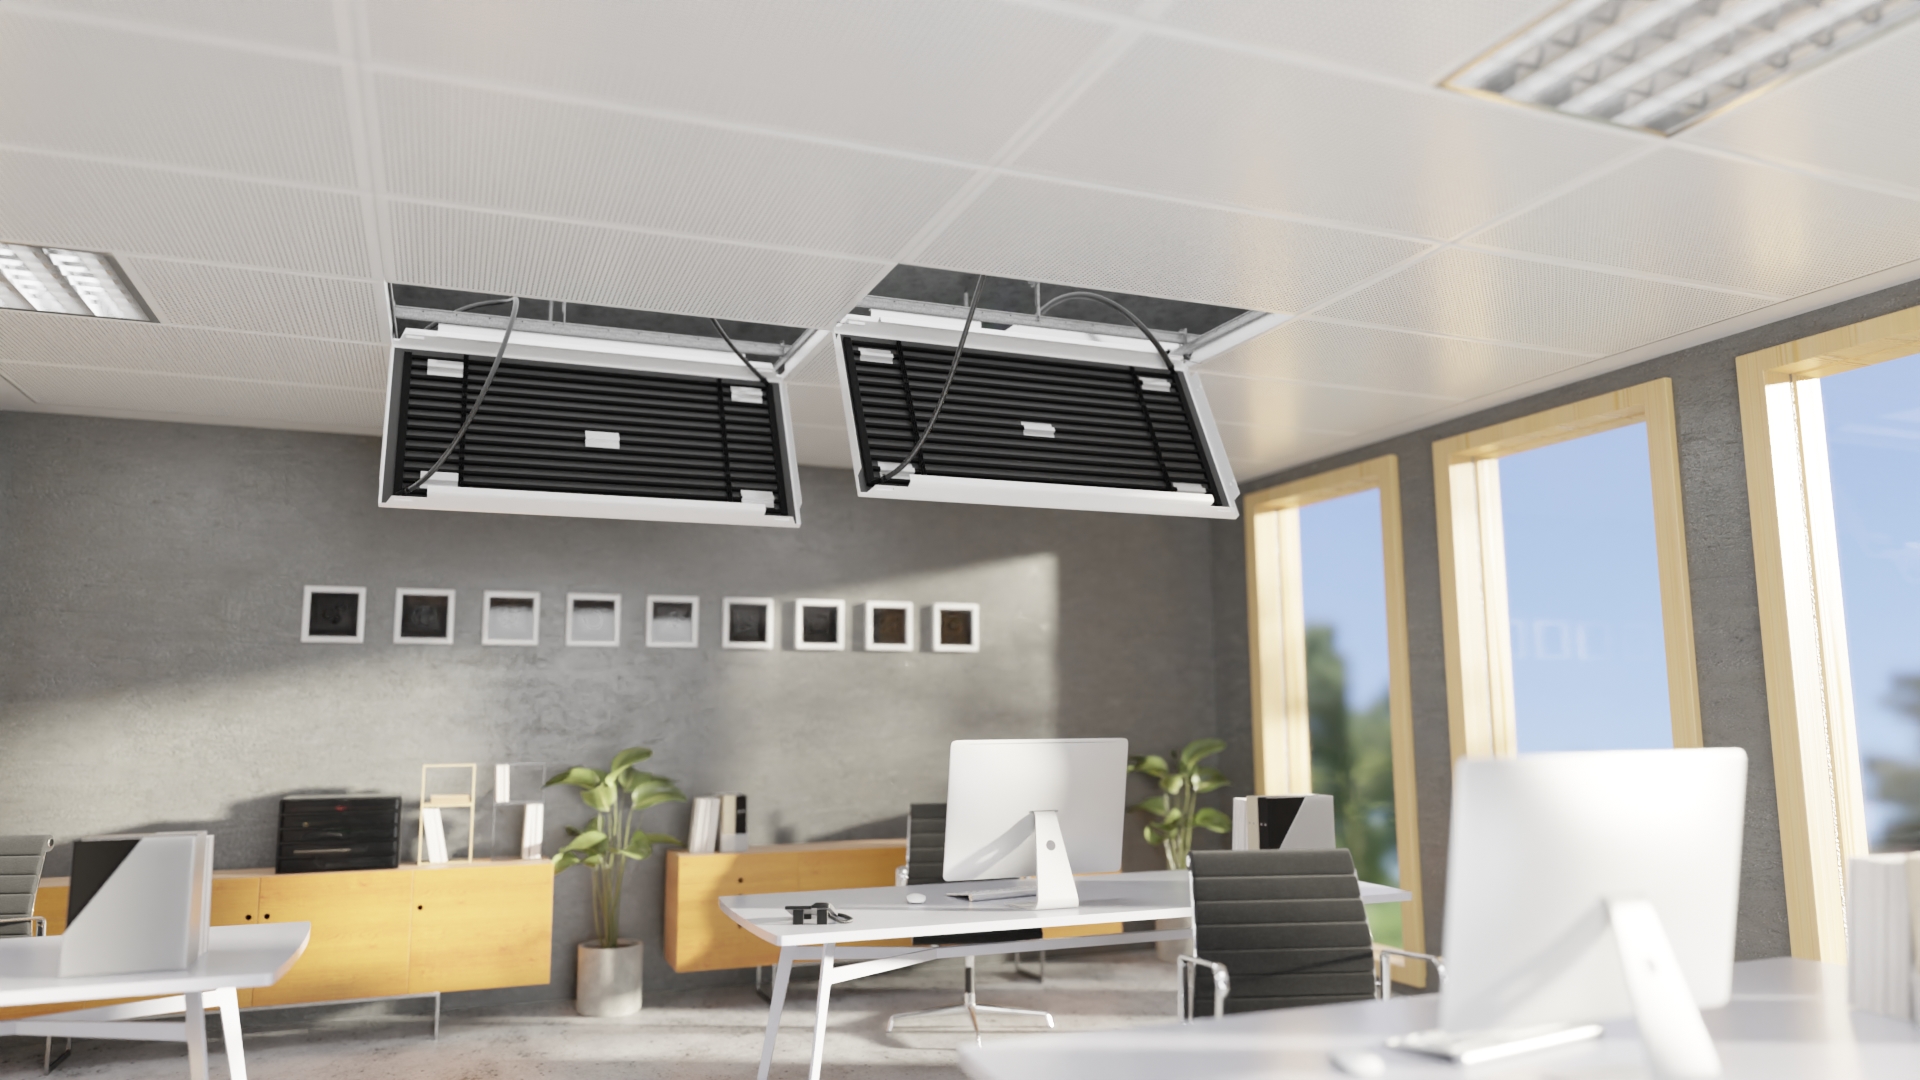 Ceiling system: Metal cassette with clamping/hanging system